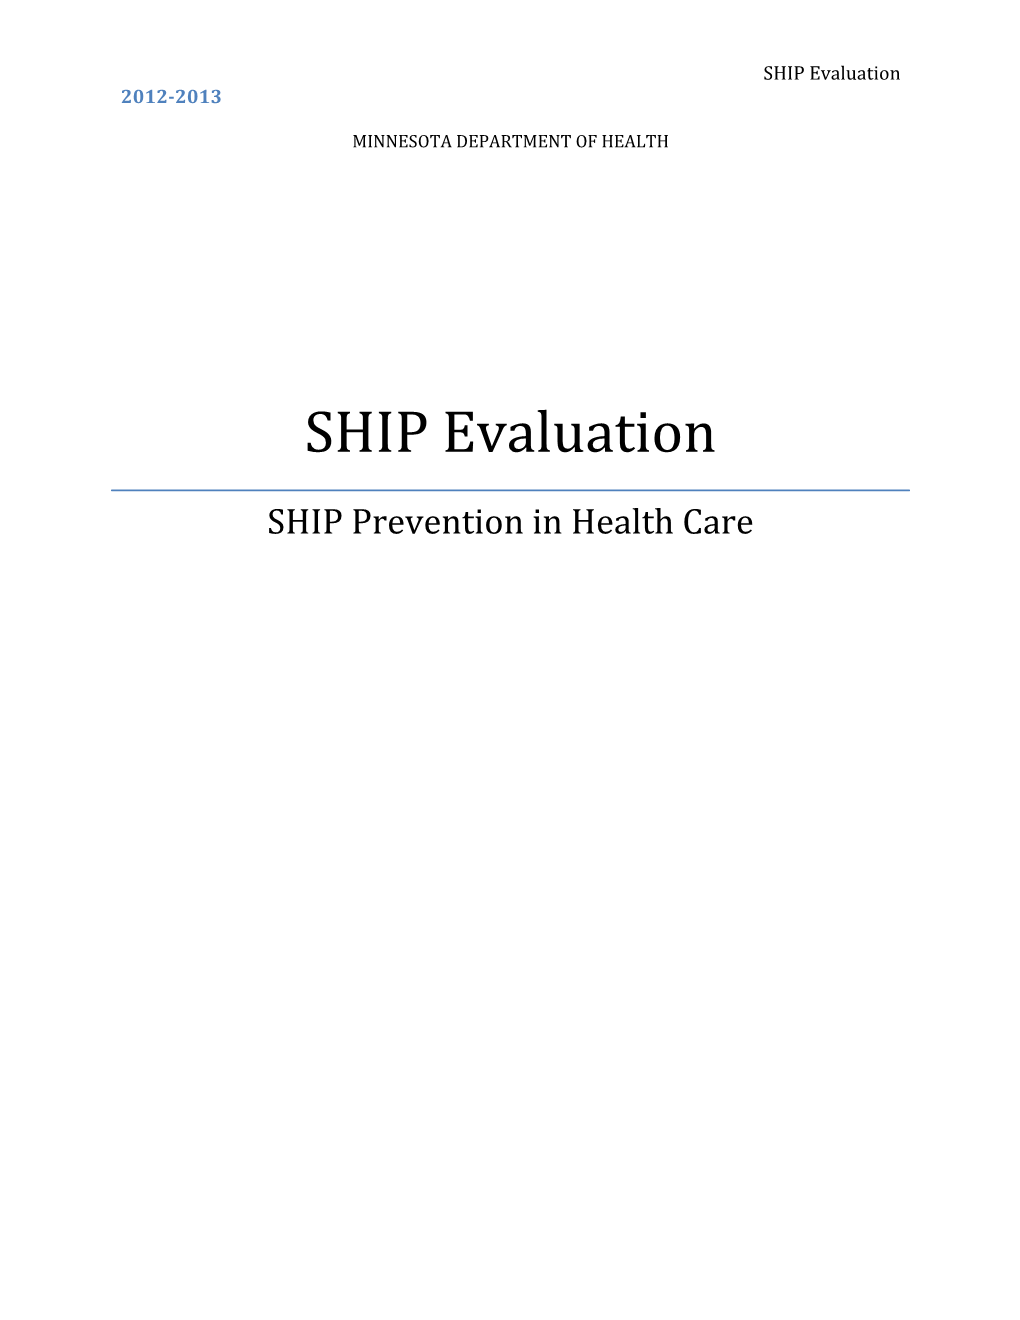 The Baseline Data Collection Form Is the Mandatory Evaluation Tool Required for the SHIP